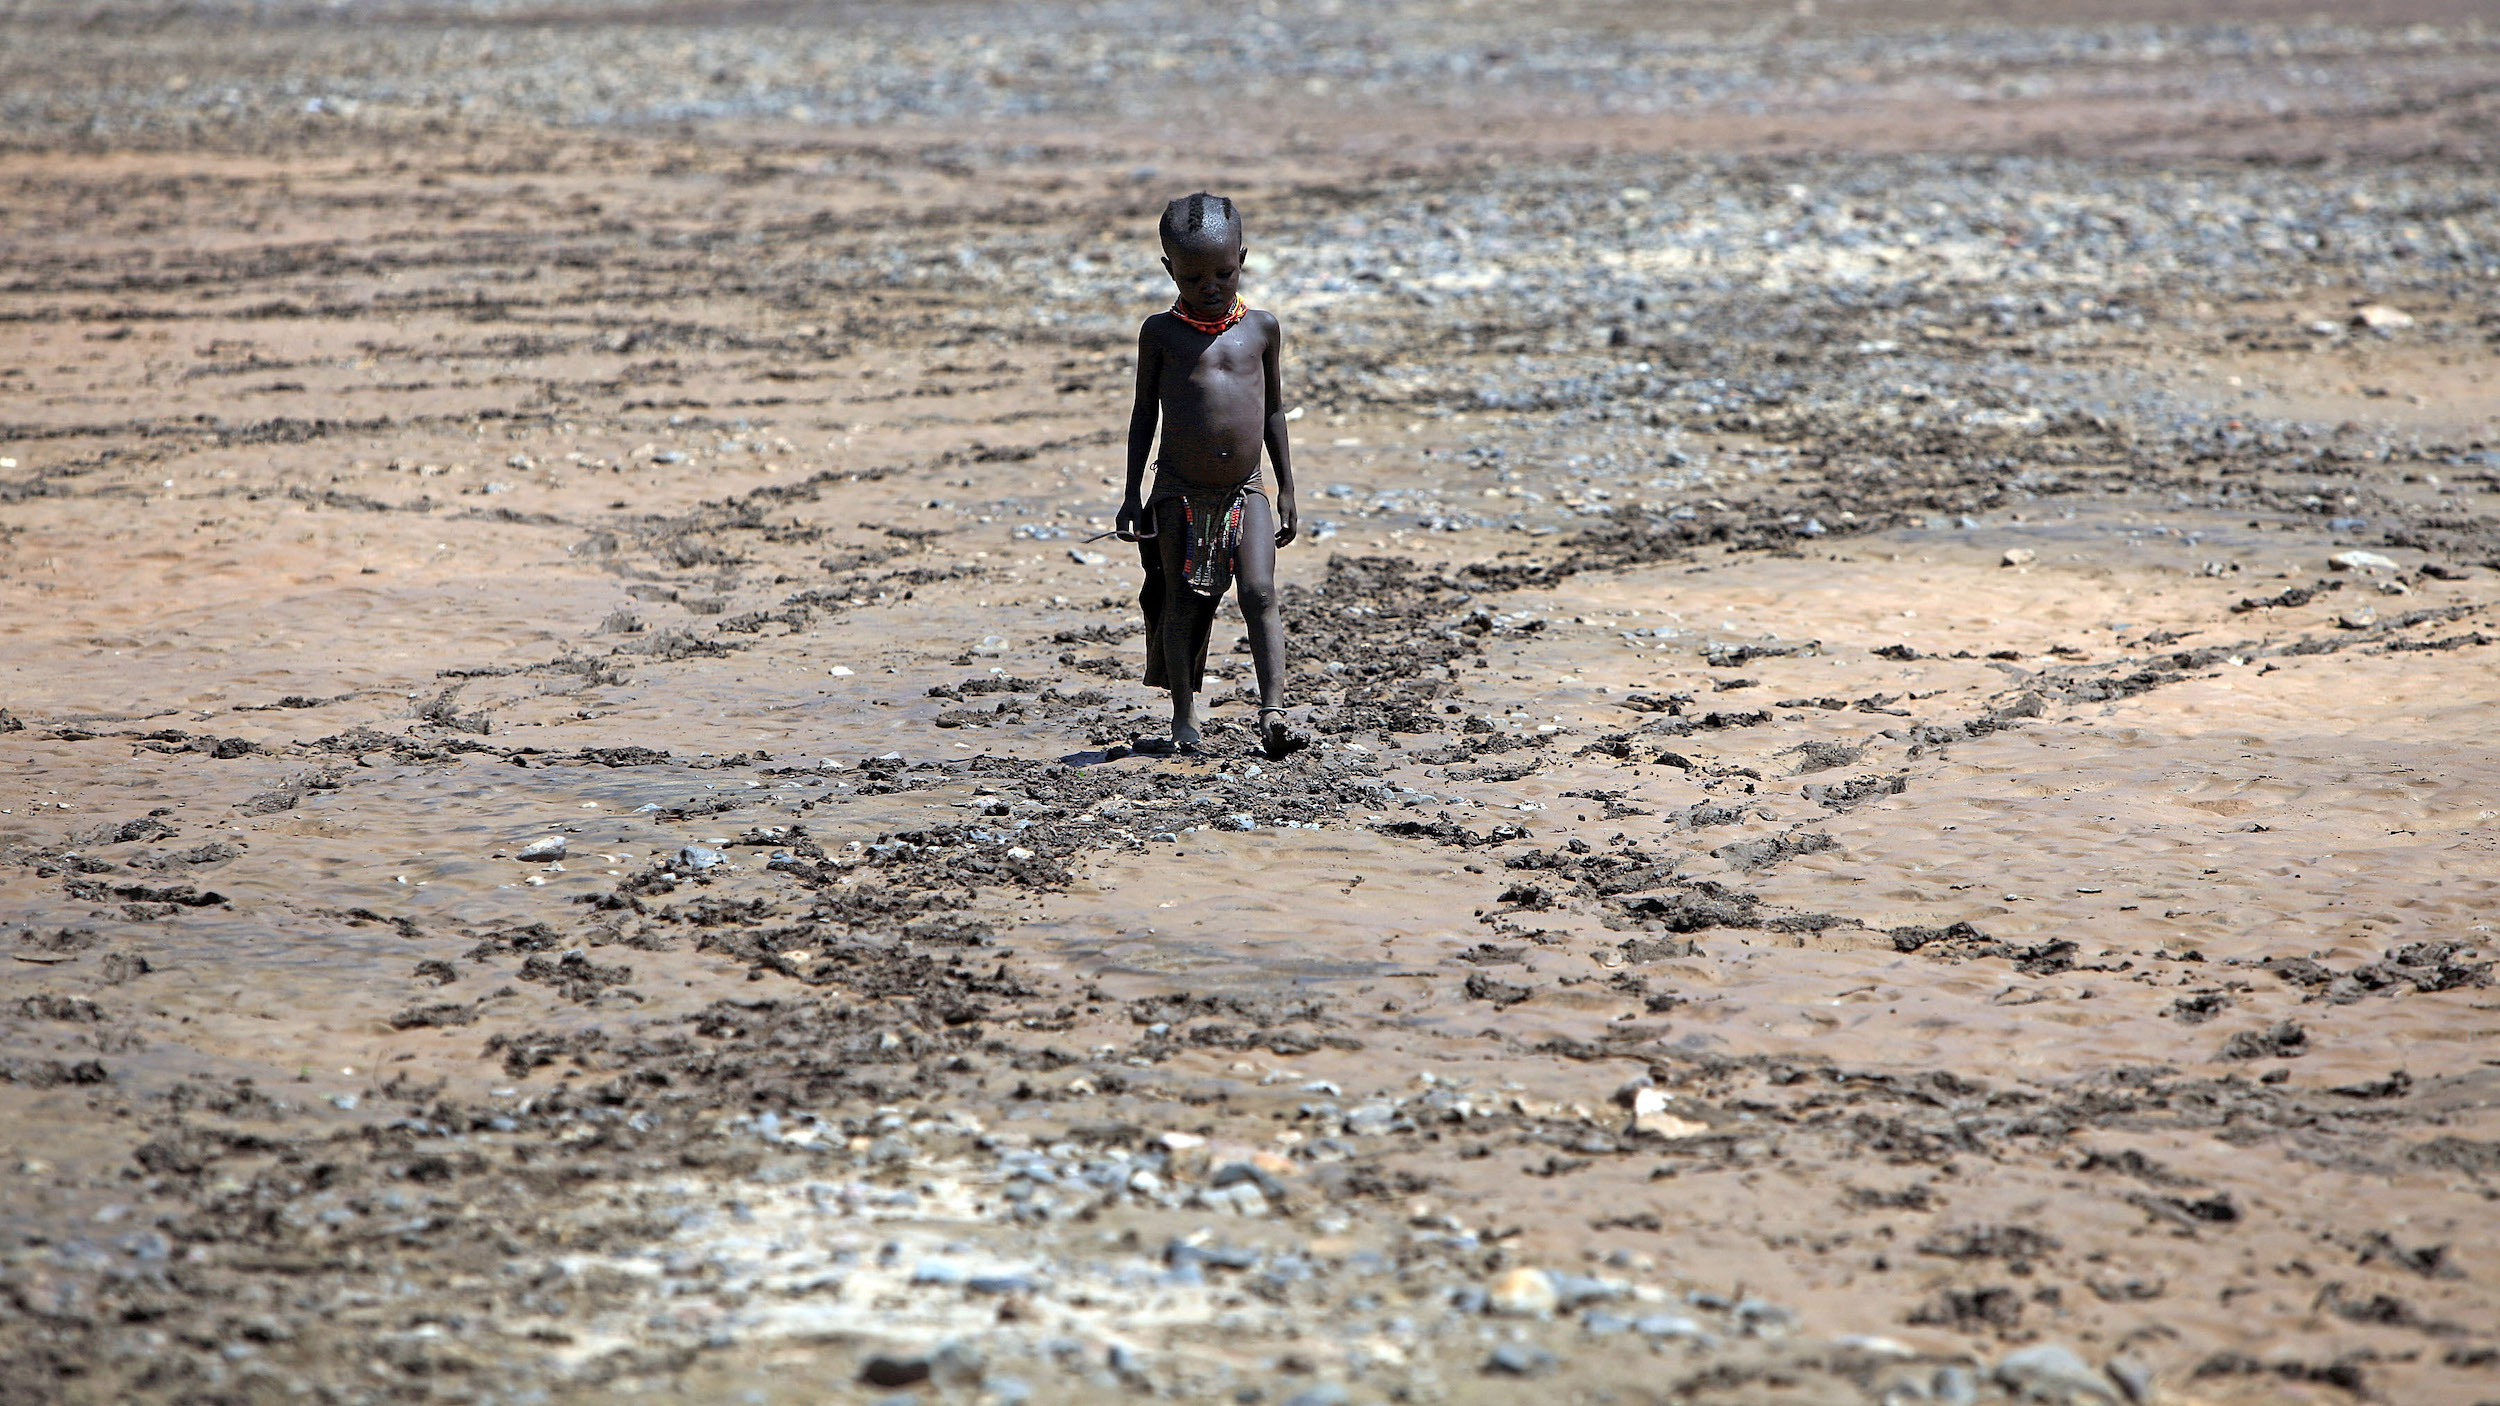 A boy from Northern Kenya's Turkana tribe walks across a dried up river bed. Over 23 million people in east Africa face critical shortages of water and food.